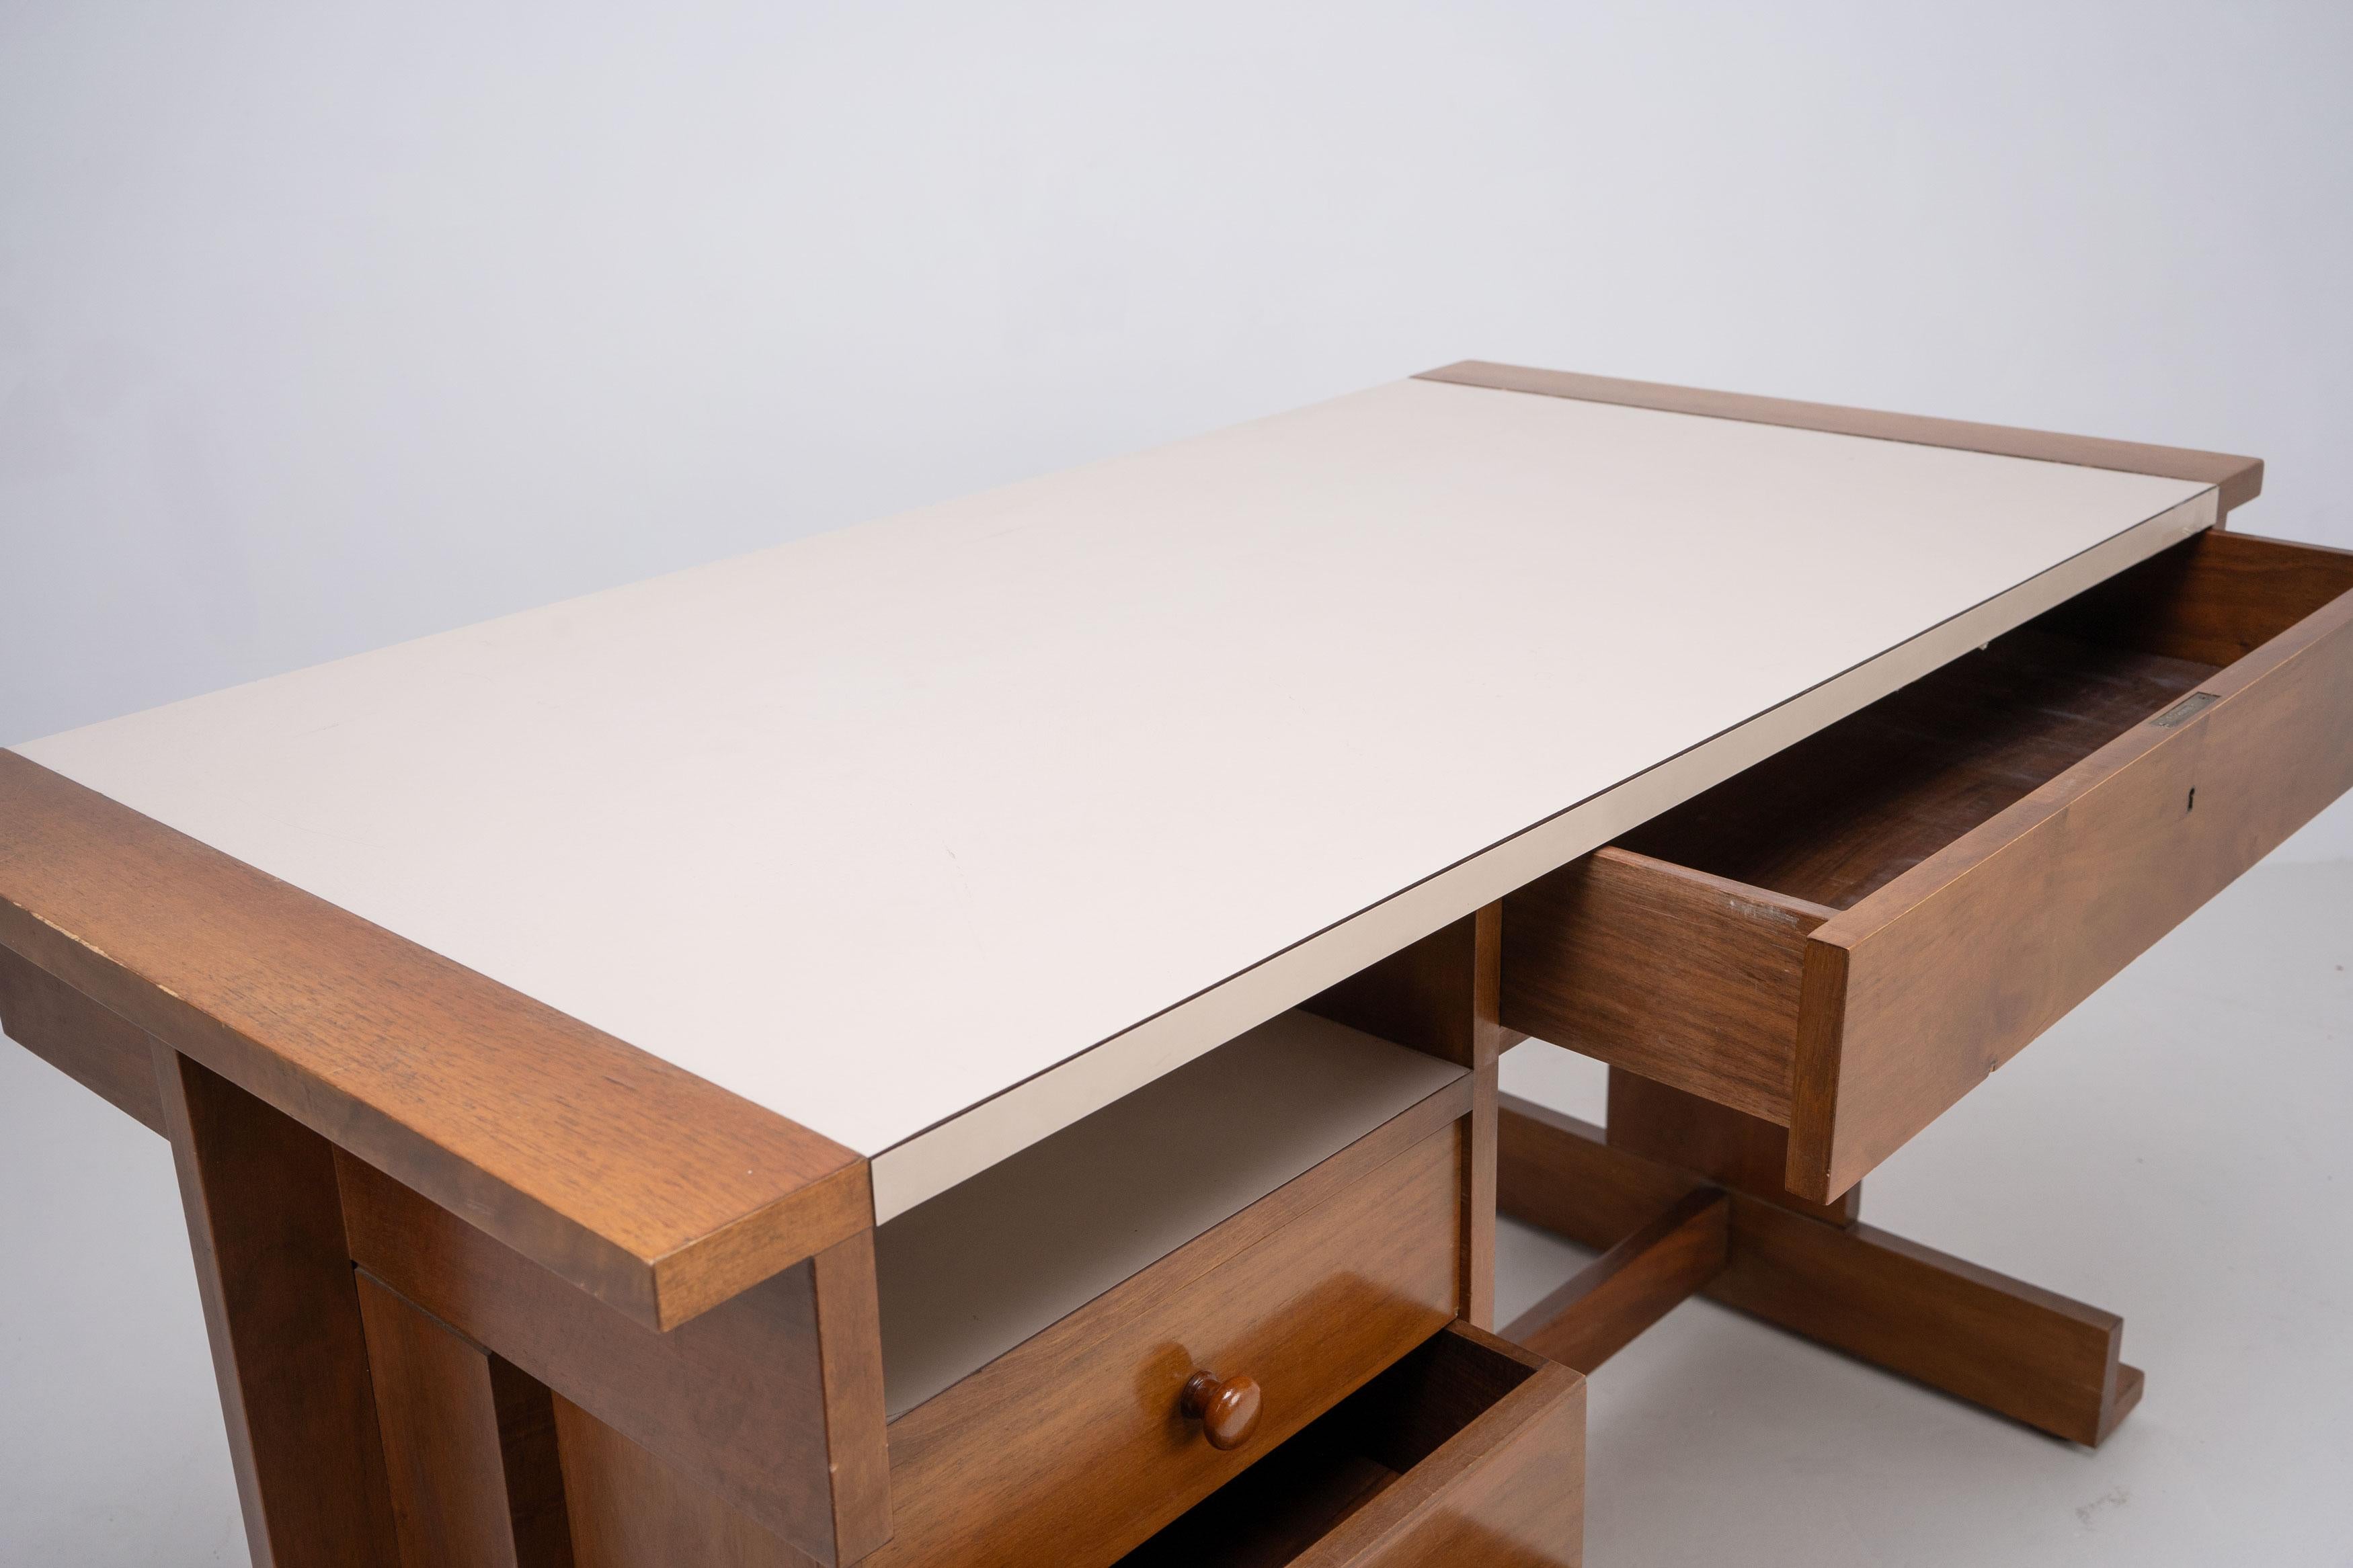 Constructivist Wood and Melamine Desk, Italy, c.1950 For Sale 3